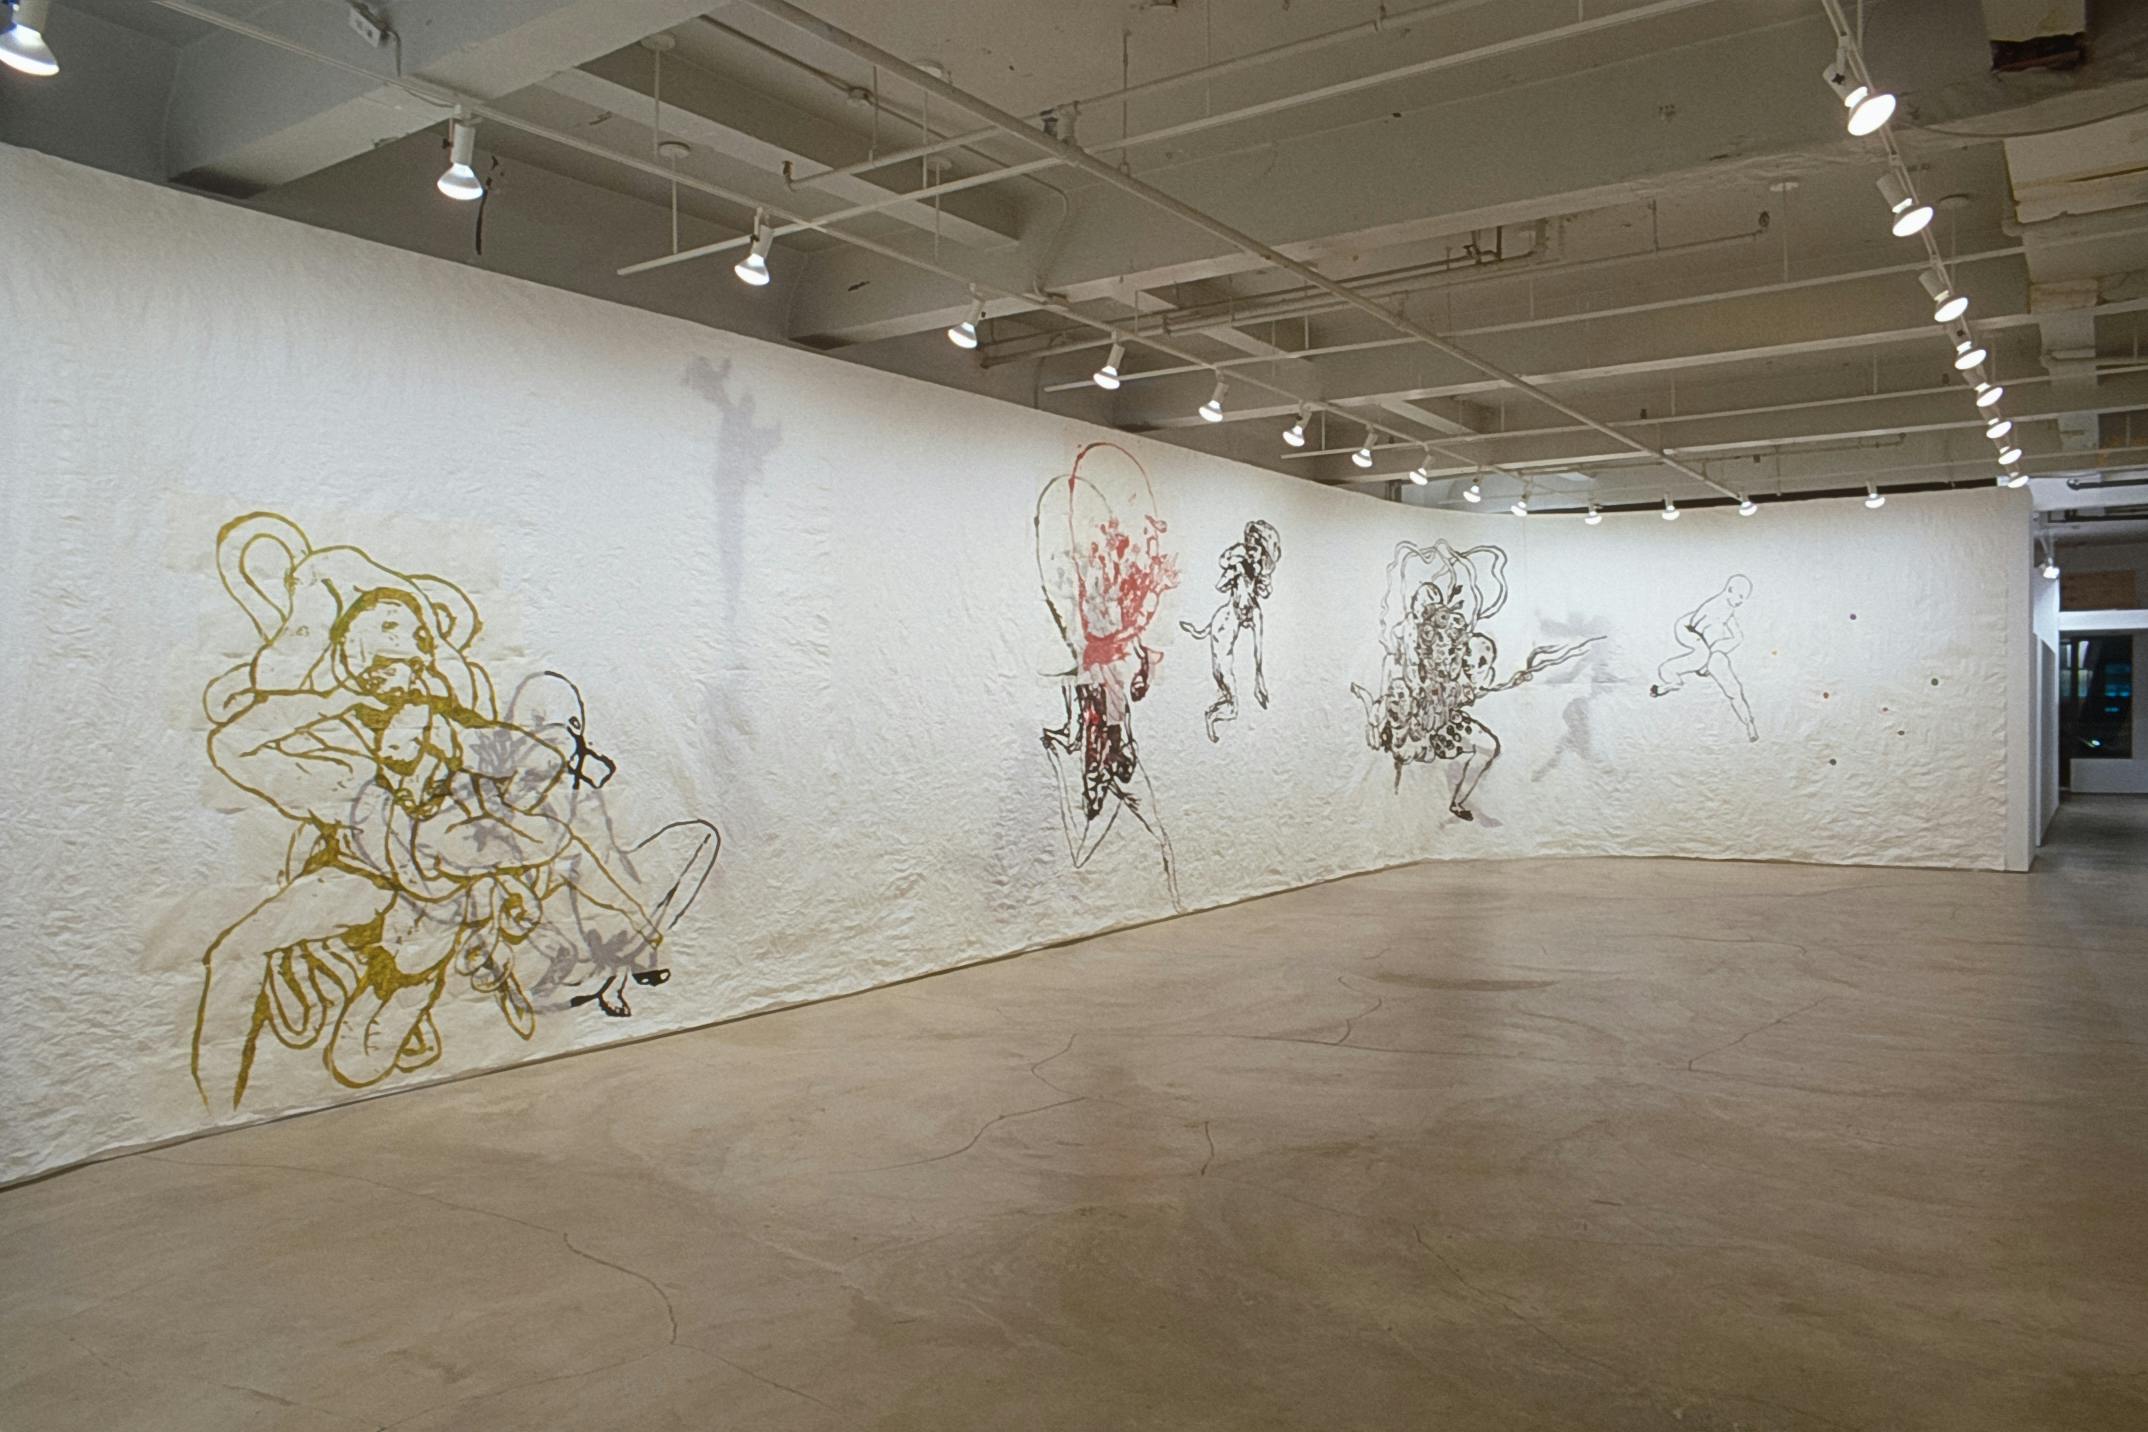 Gallery walls are covered by a wide white scroll of paper, on which Ed Pien’s drawings are made. All of the drawn figures are layered and highly abstracted. All the figures have human legs.